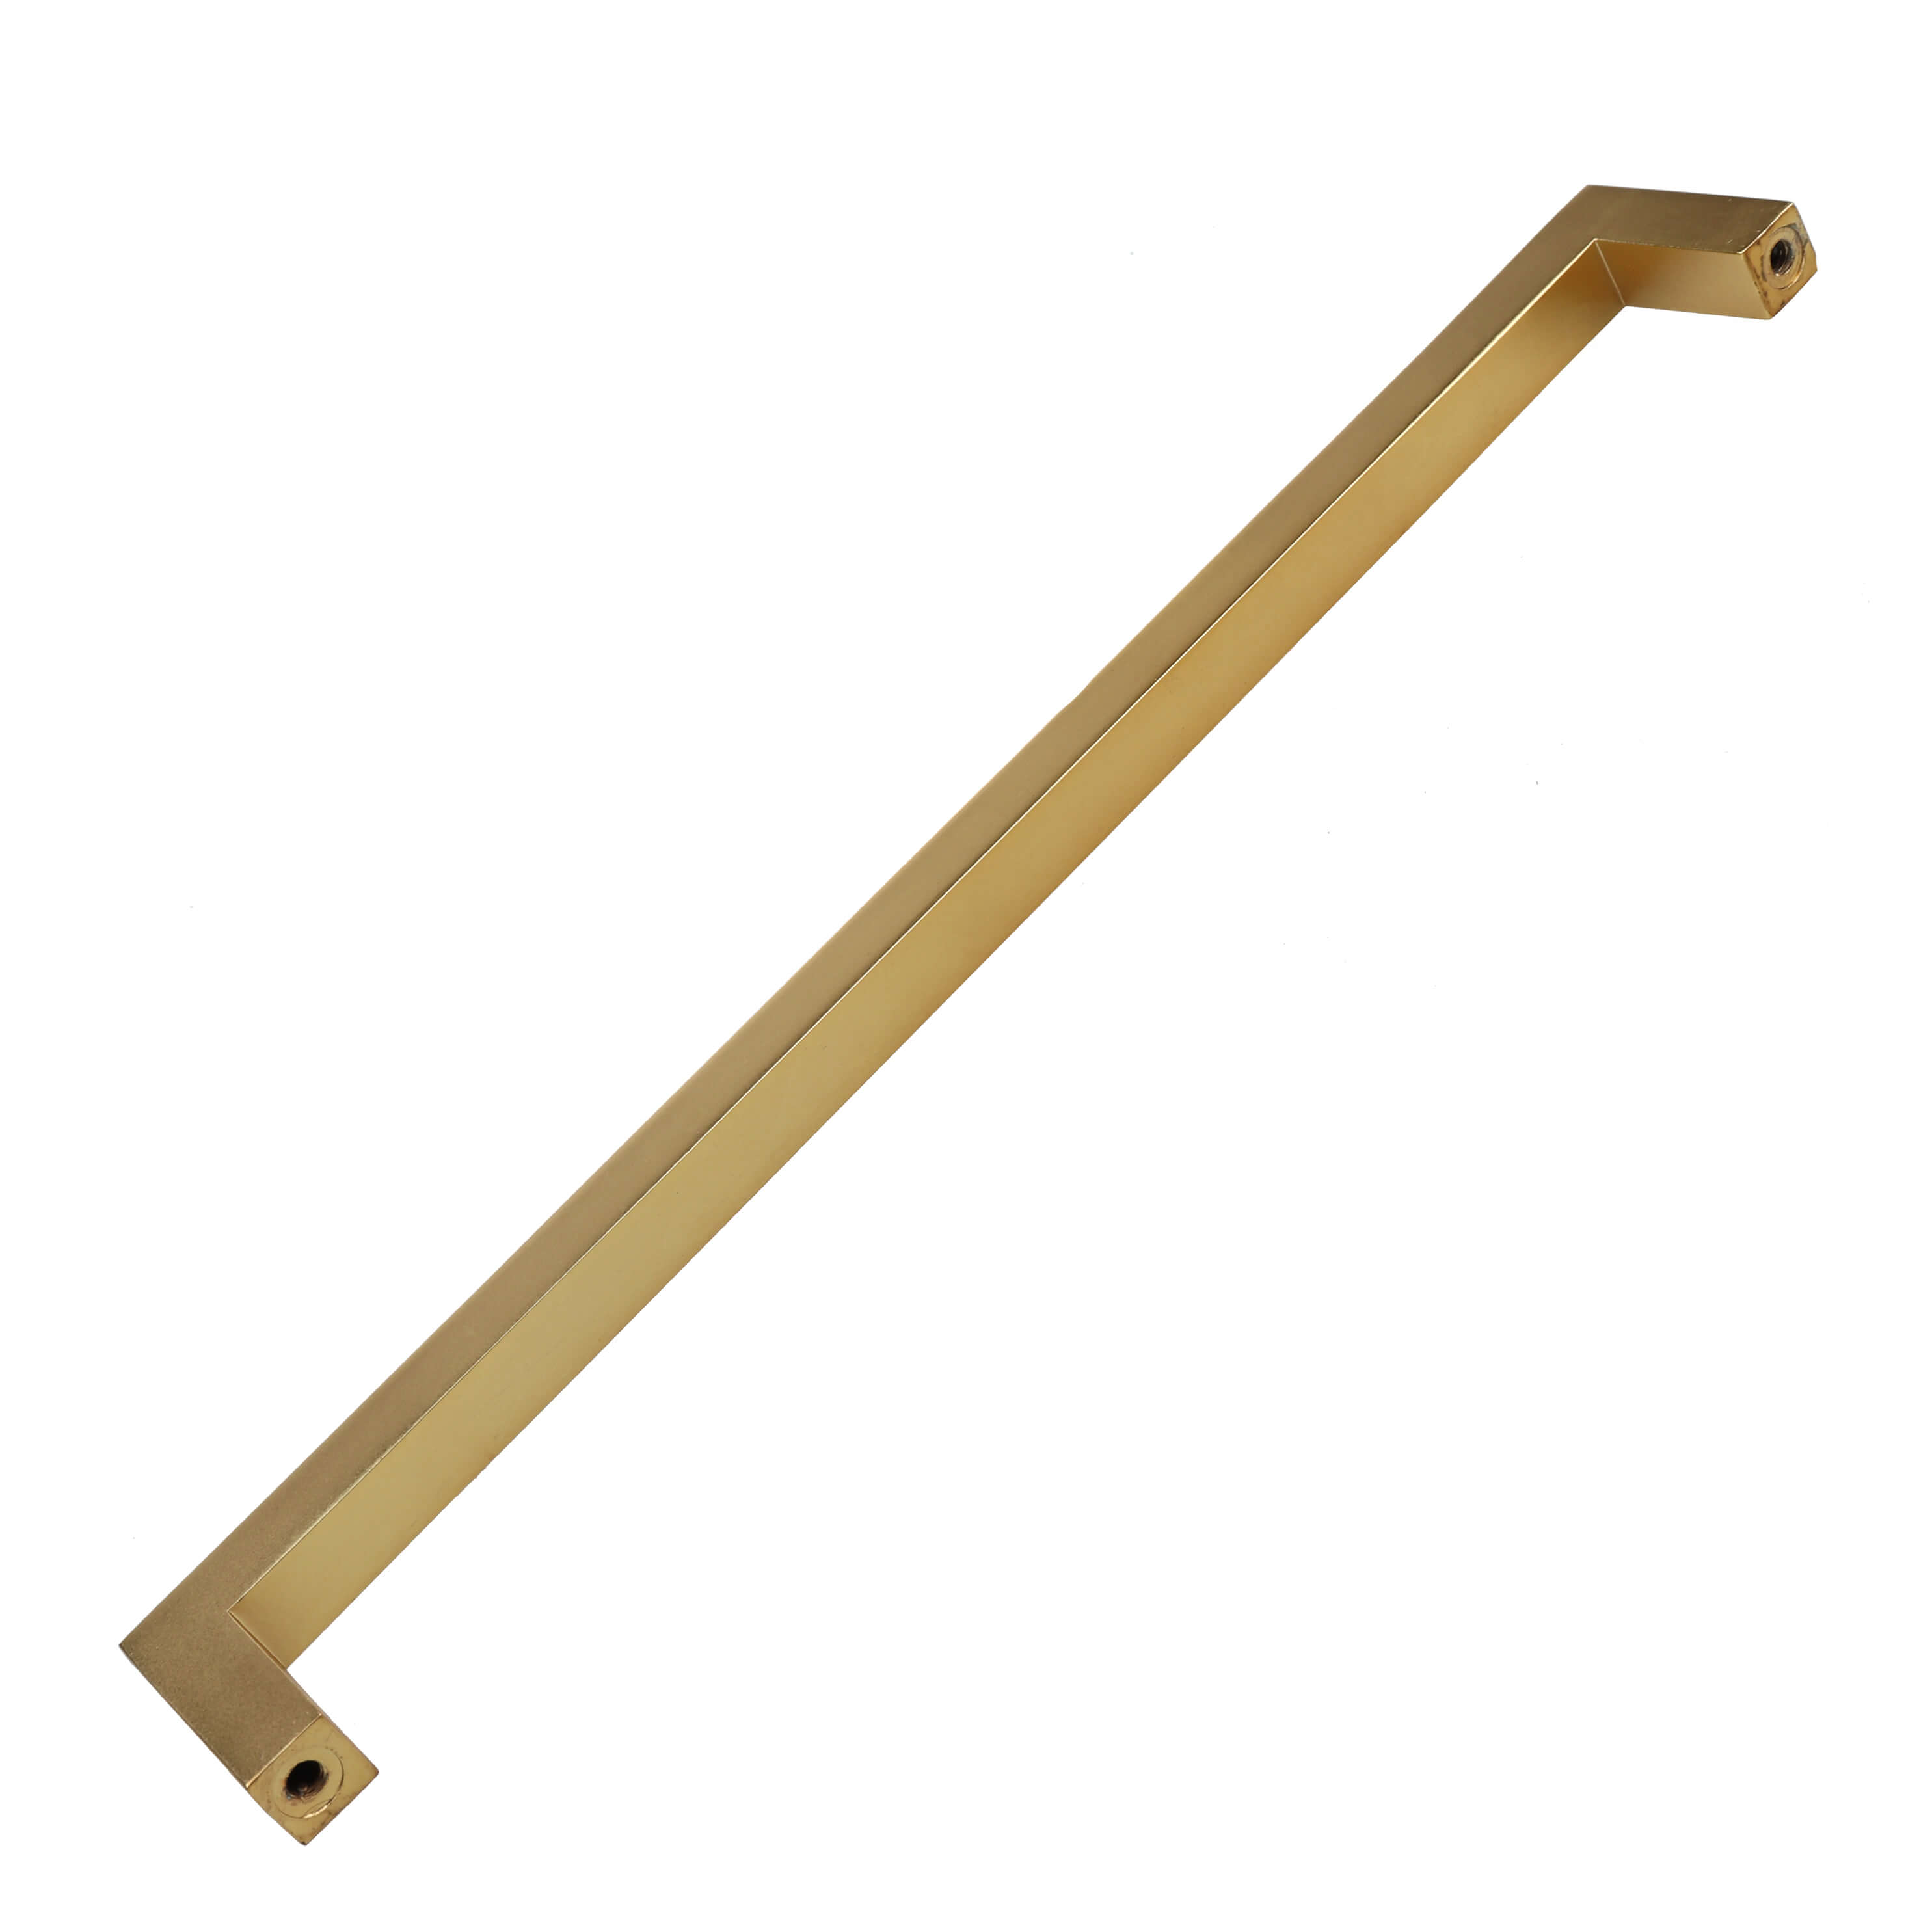 GlideRite 8-3/4 in. Center Solid Square Bar Cabinet Pulls, Brass Gold, Pack of 10 - image 3 of 3